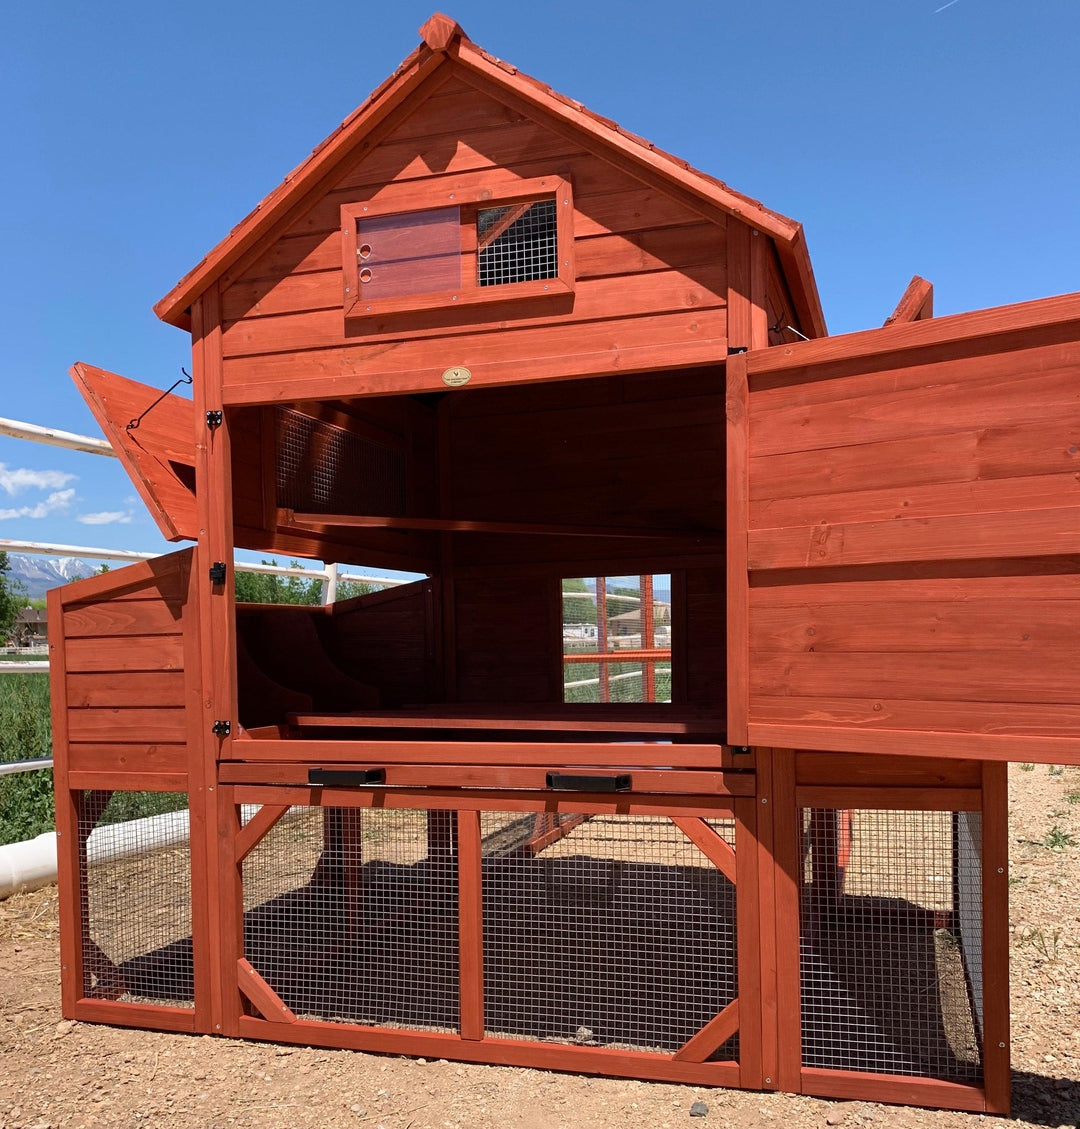 Rhode Island Homestead XL 10+ Chickens Hen House Only. IN STOCK!!